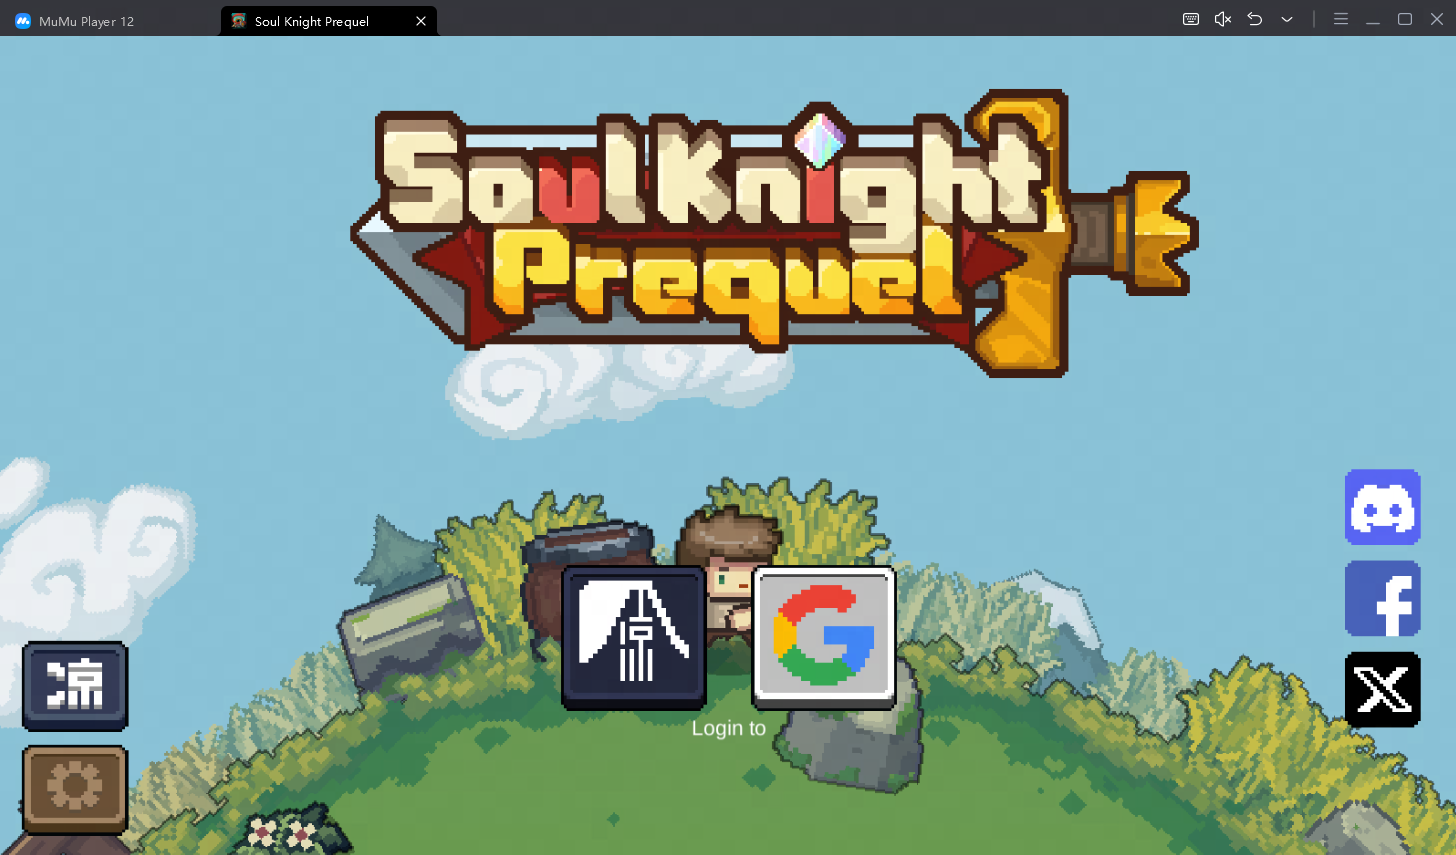 play soul knight prequel on pc